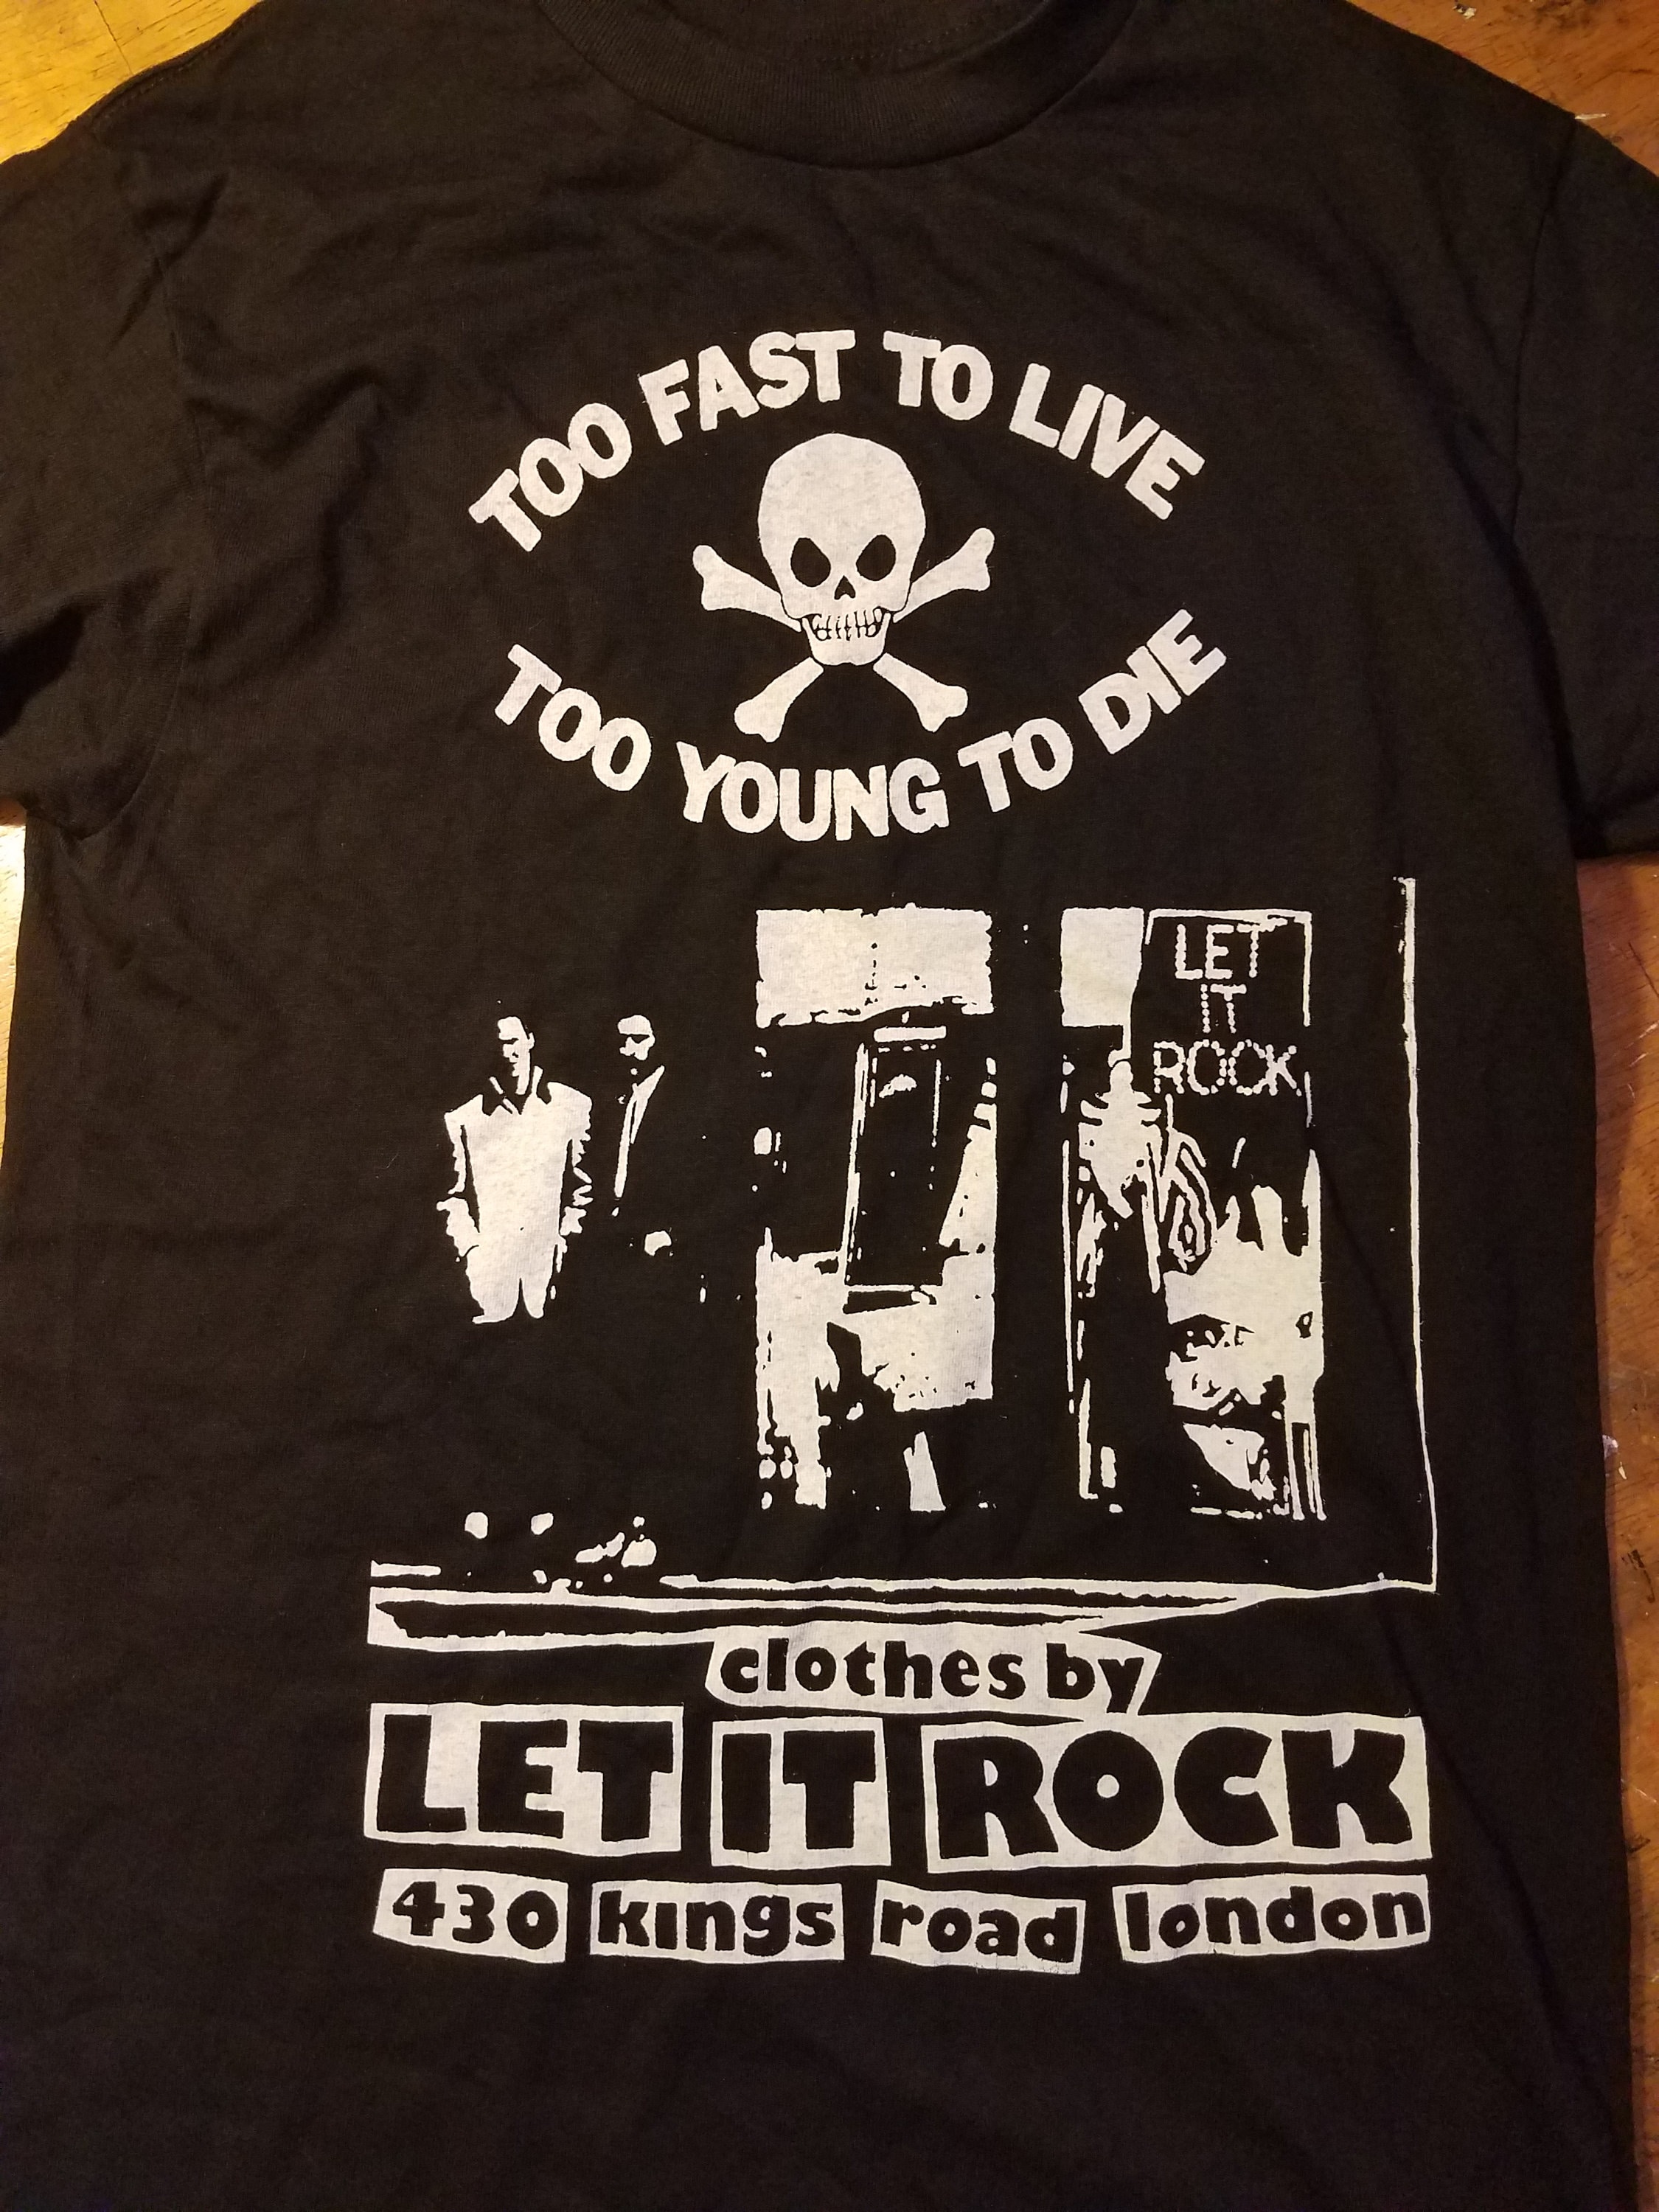 Too Fast to Live Too Young to Die - Etsy